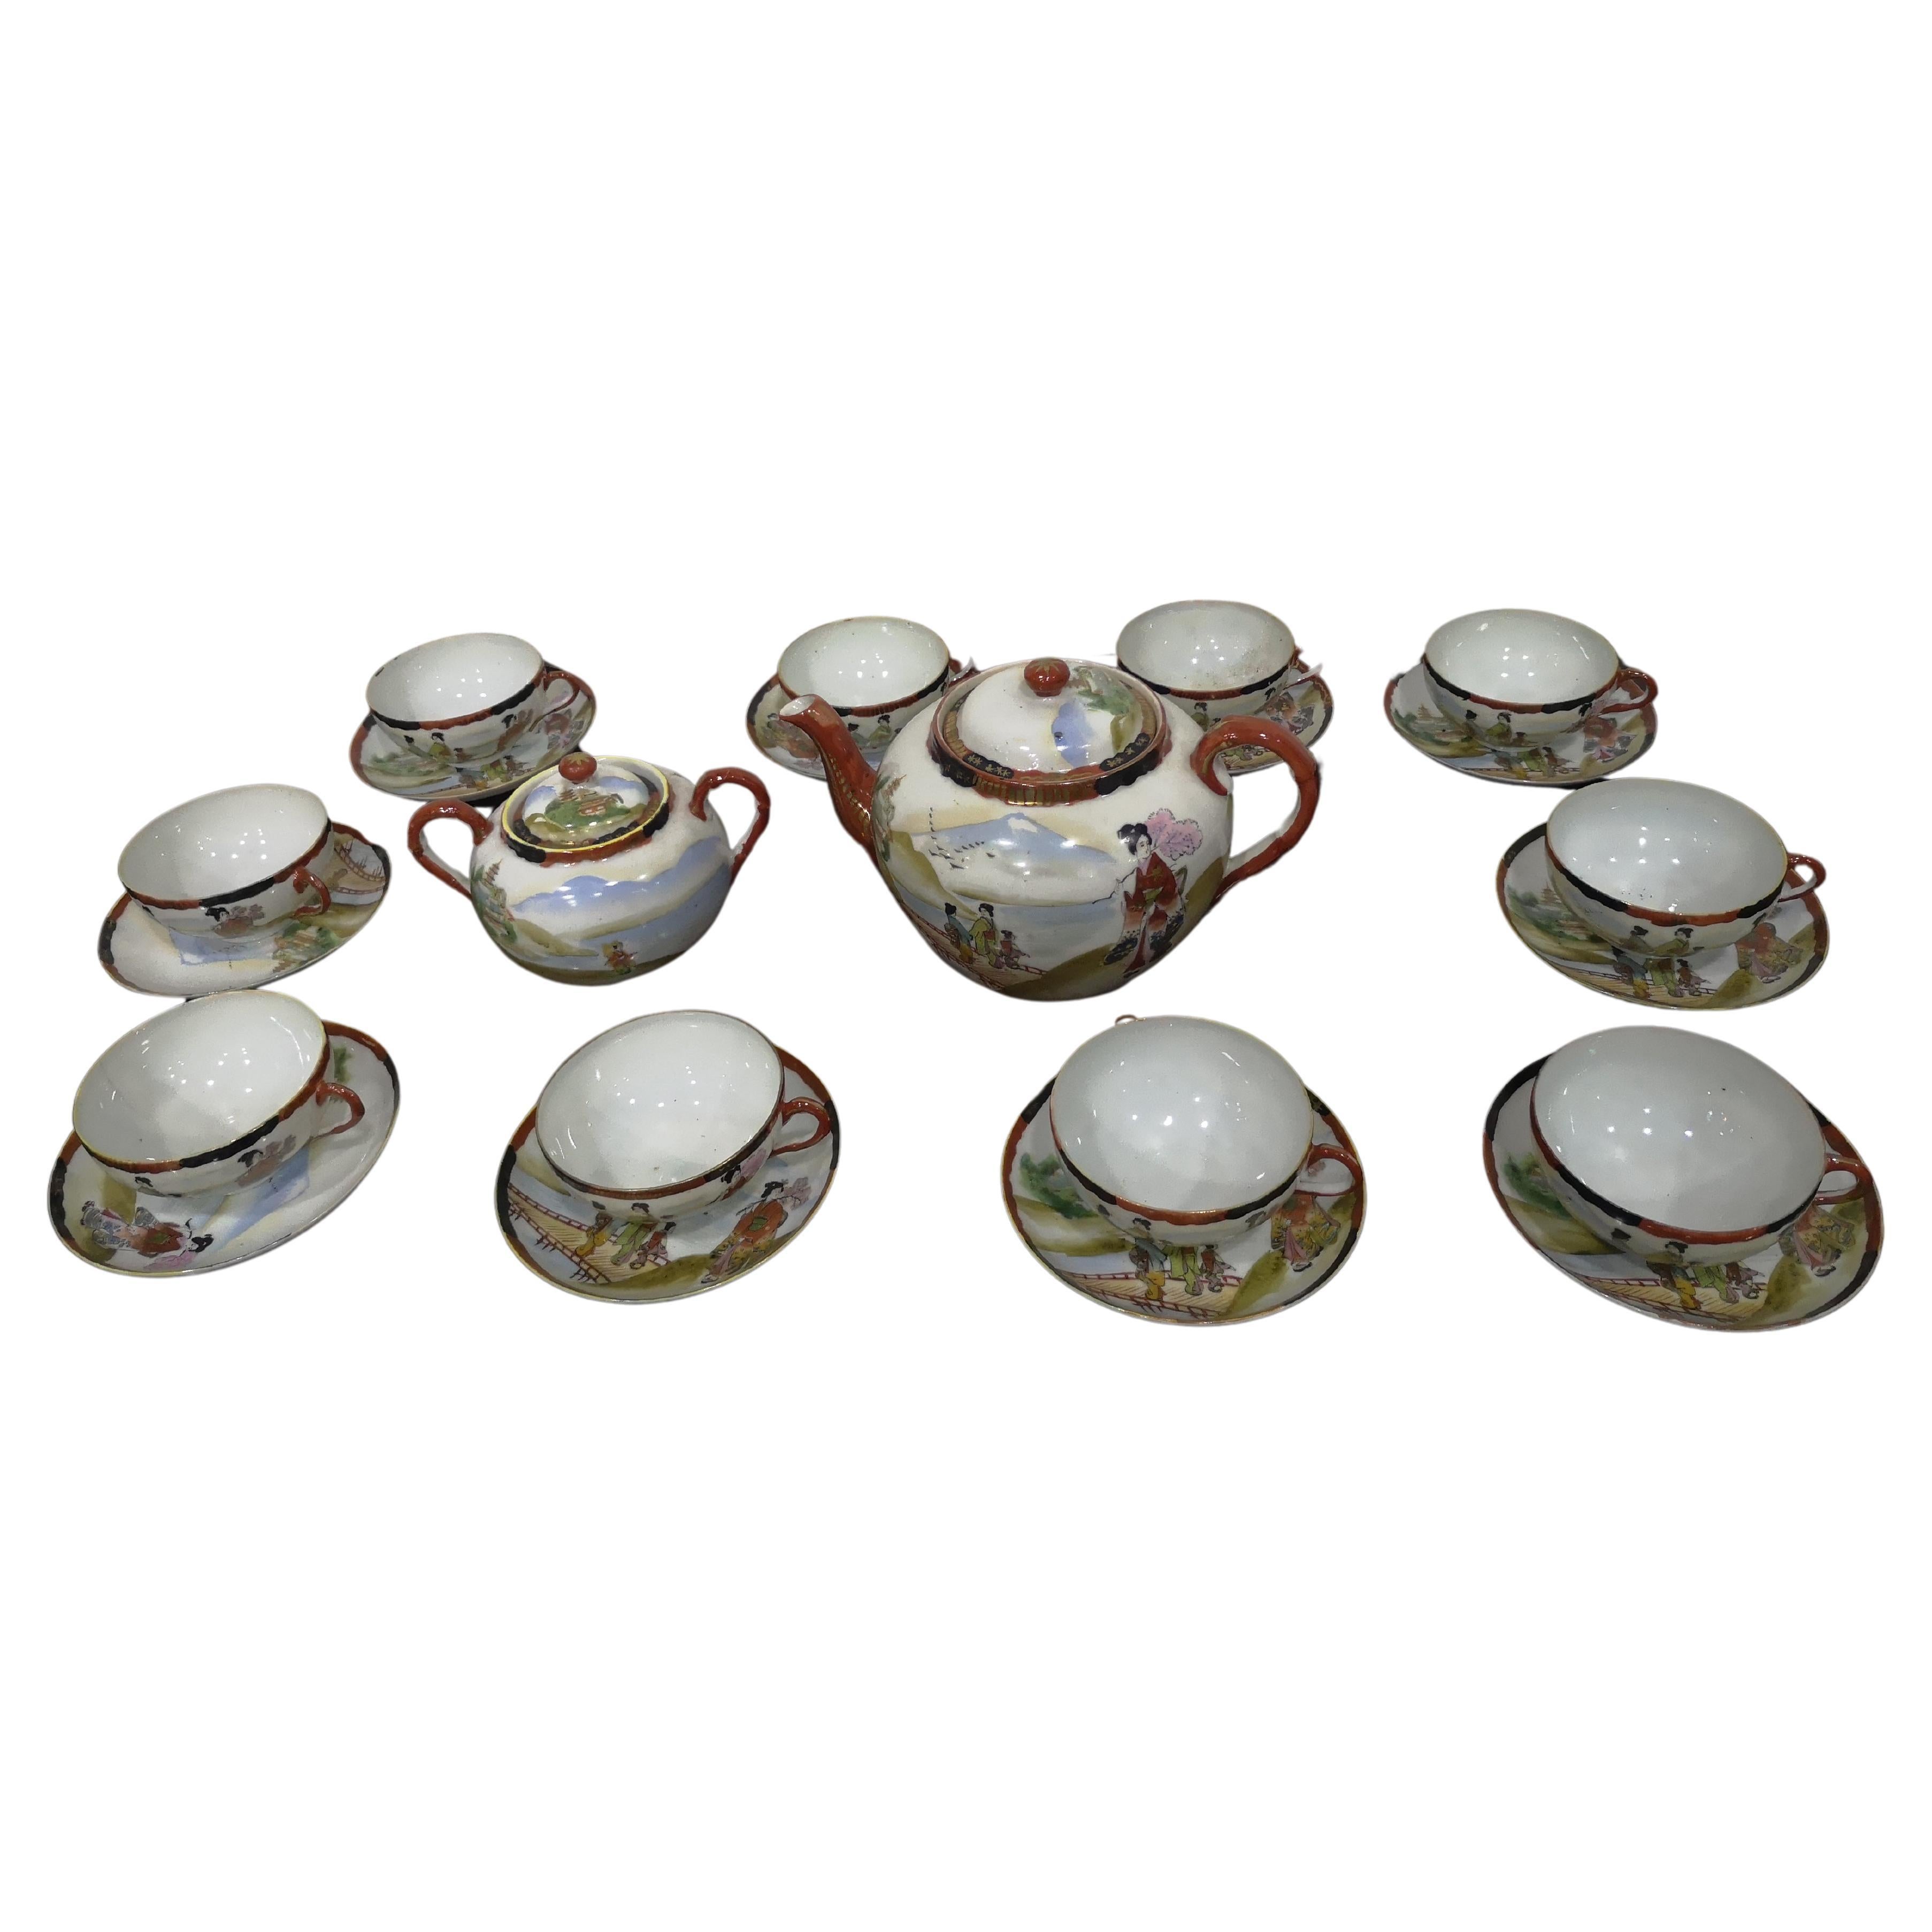 Japanese tea service for 10 in fine mid-19th century porcelain For Sale